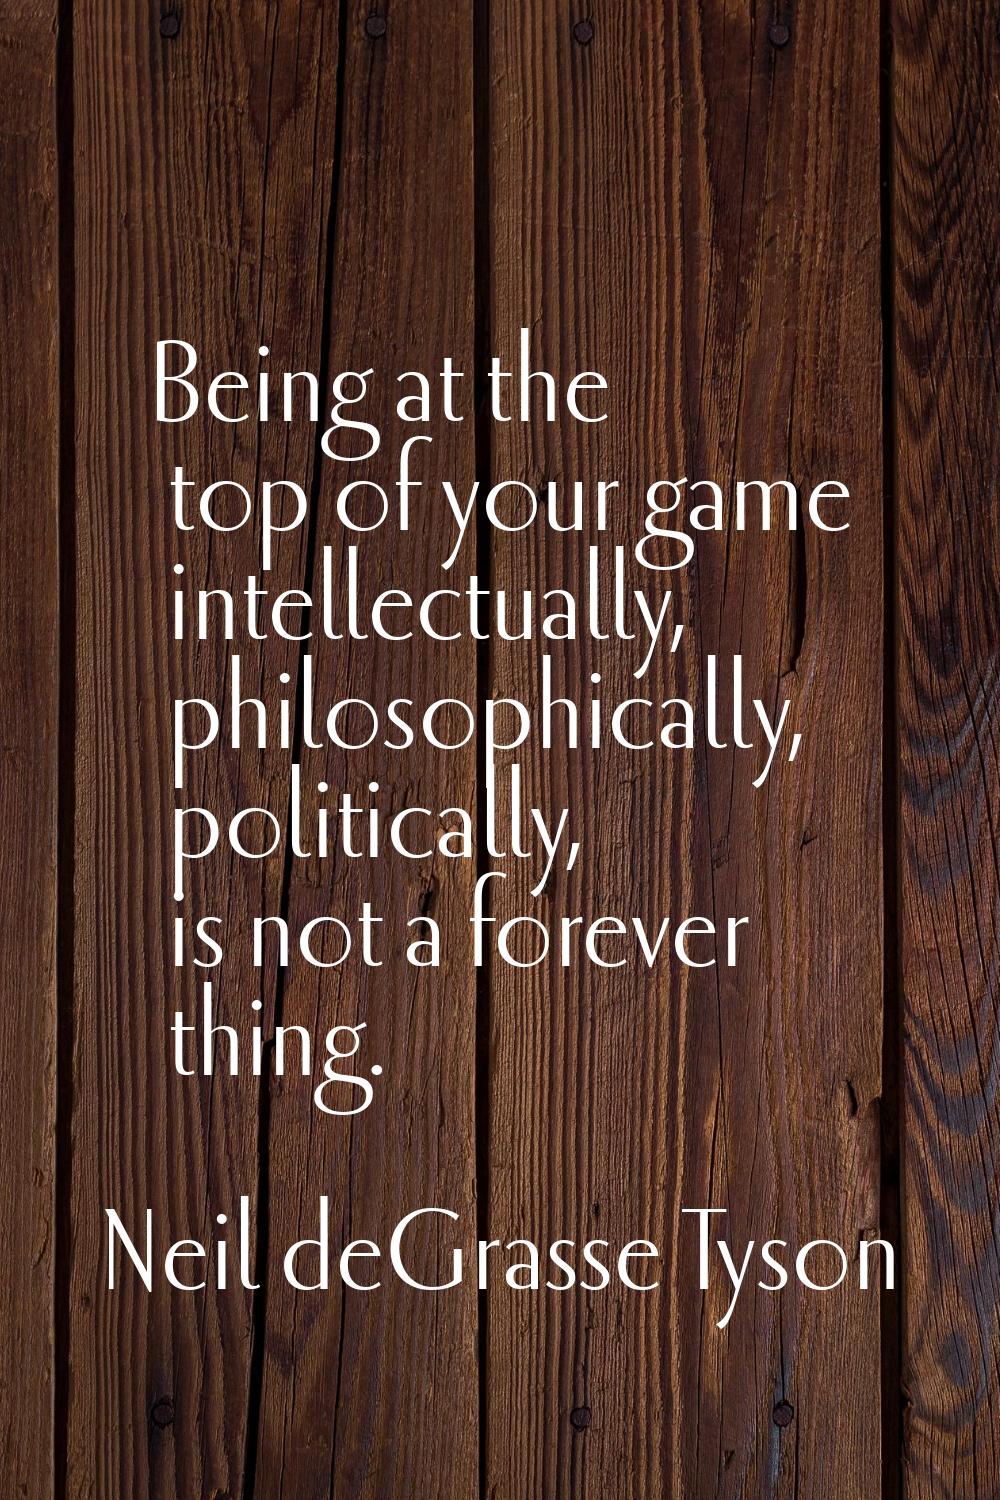 Being at the top of your game intellectually, philosophically, politically, is not a forever thing.